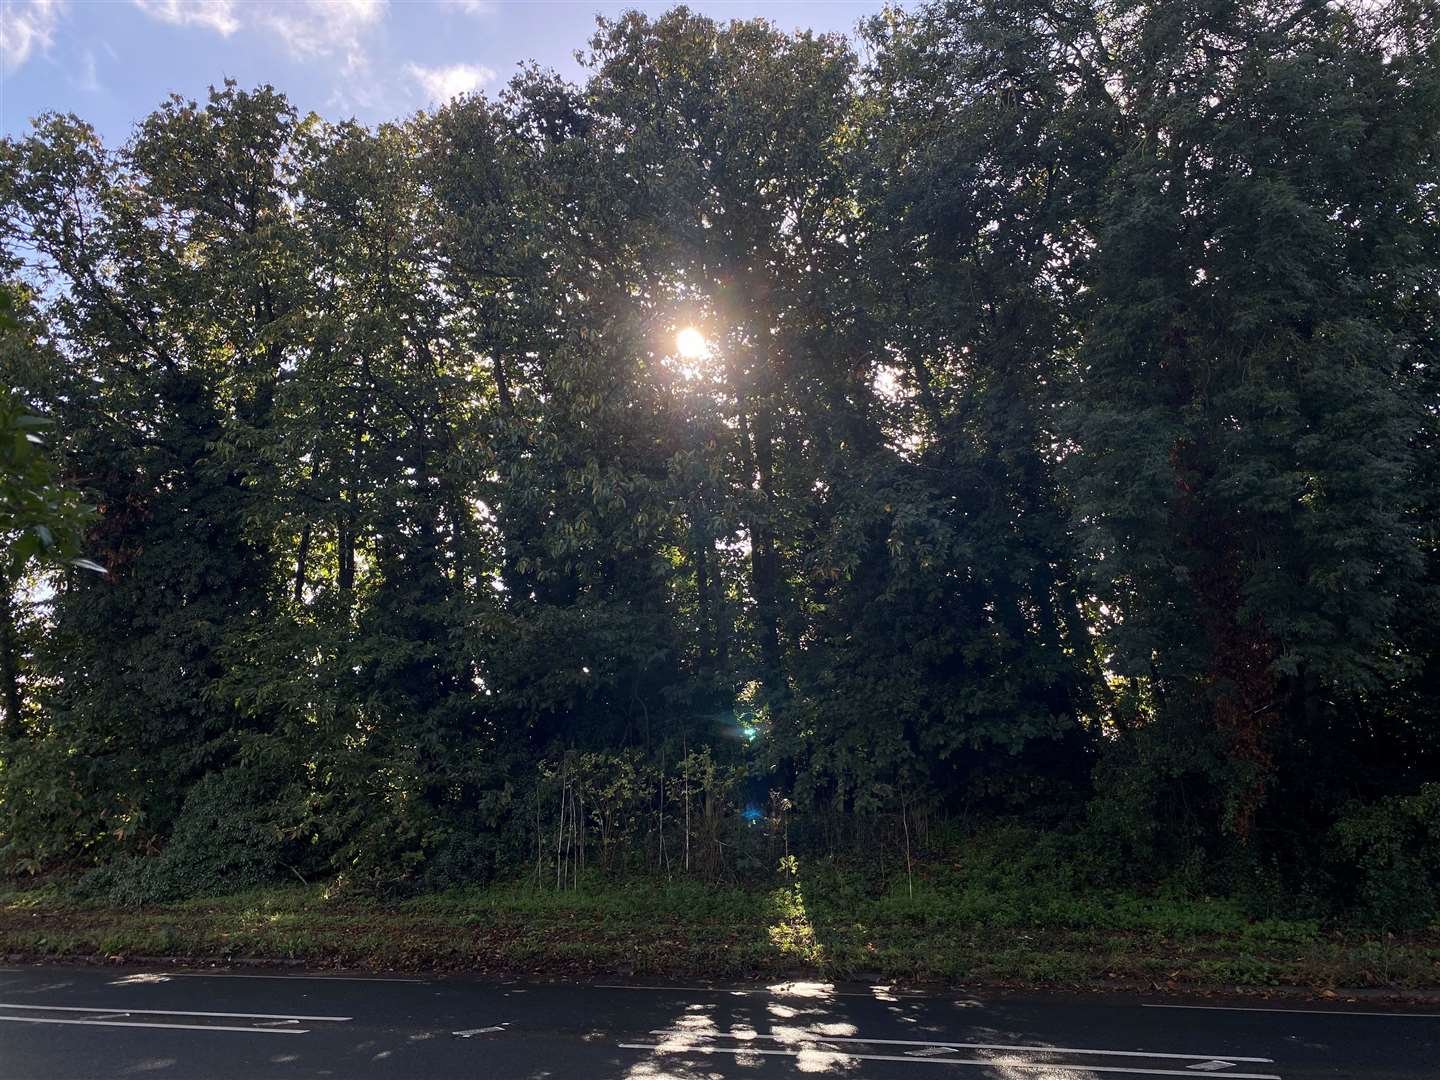 More trees along the A20 London Road in East Malling could be cut down